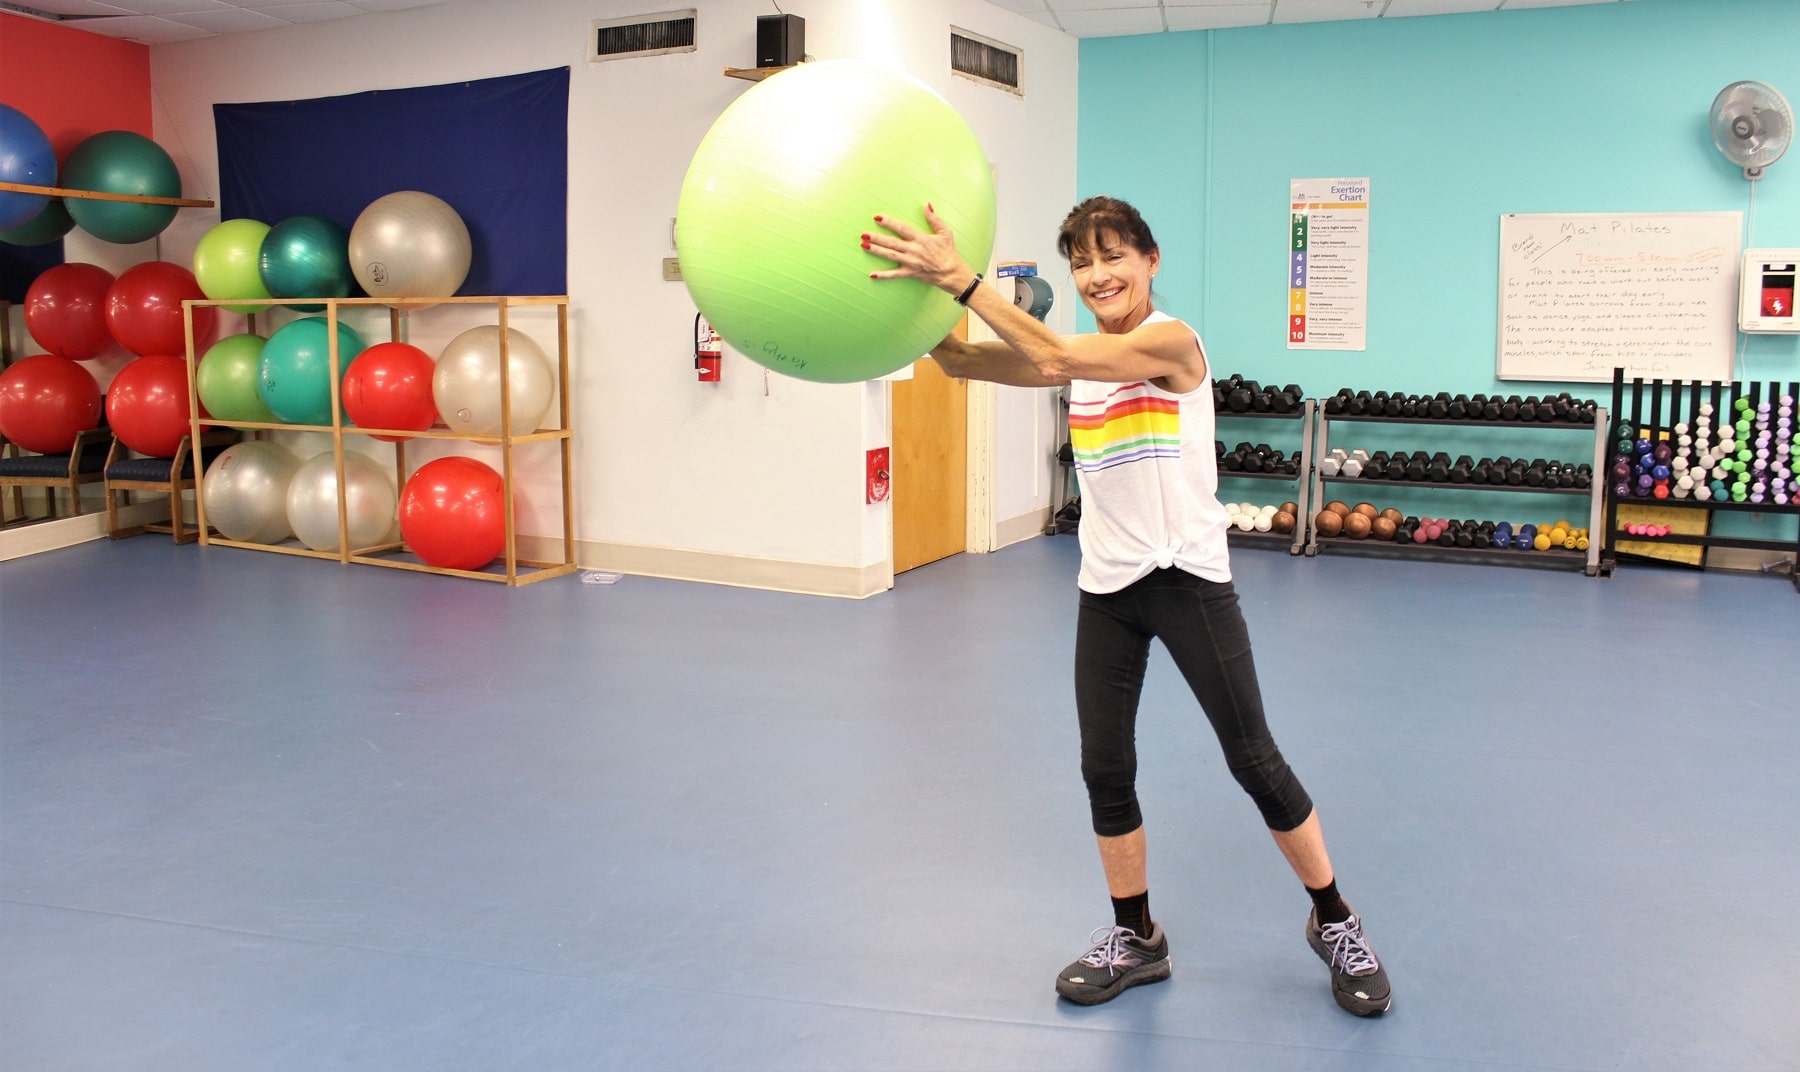 Stability Ball Exercises For Seniors - Fitness With Cindy